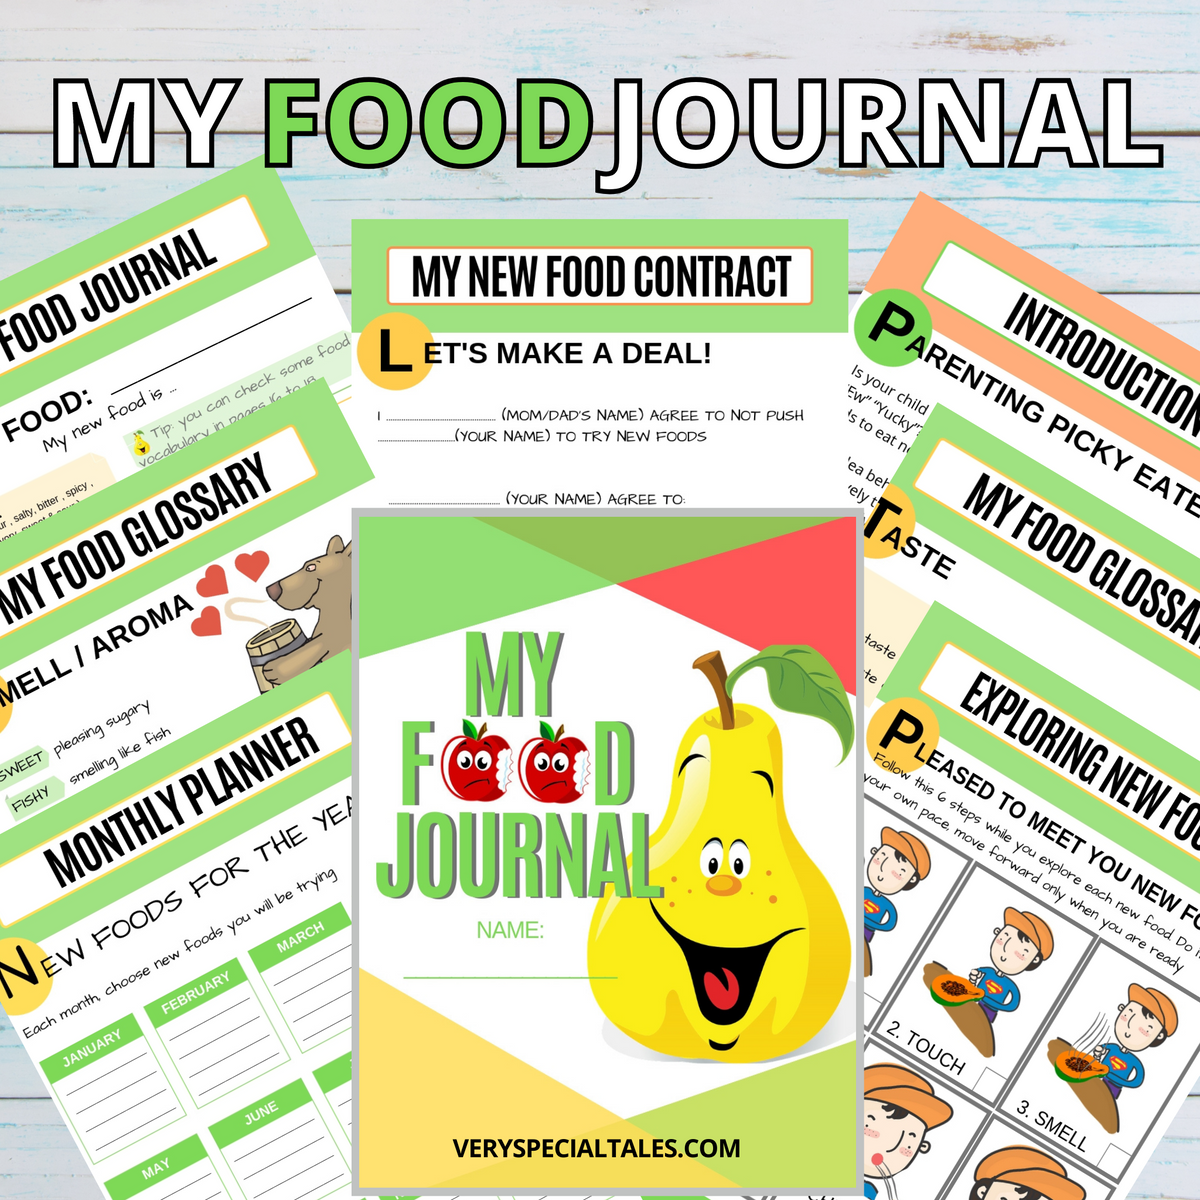 Examples of pages from My Food Journal, containing playful illustrations of food and children eating, with activities and planners.